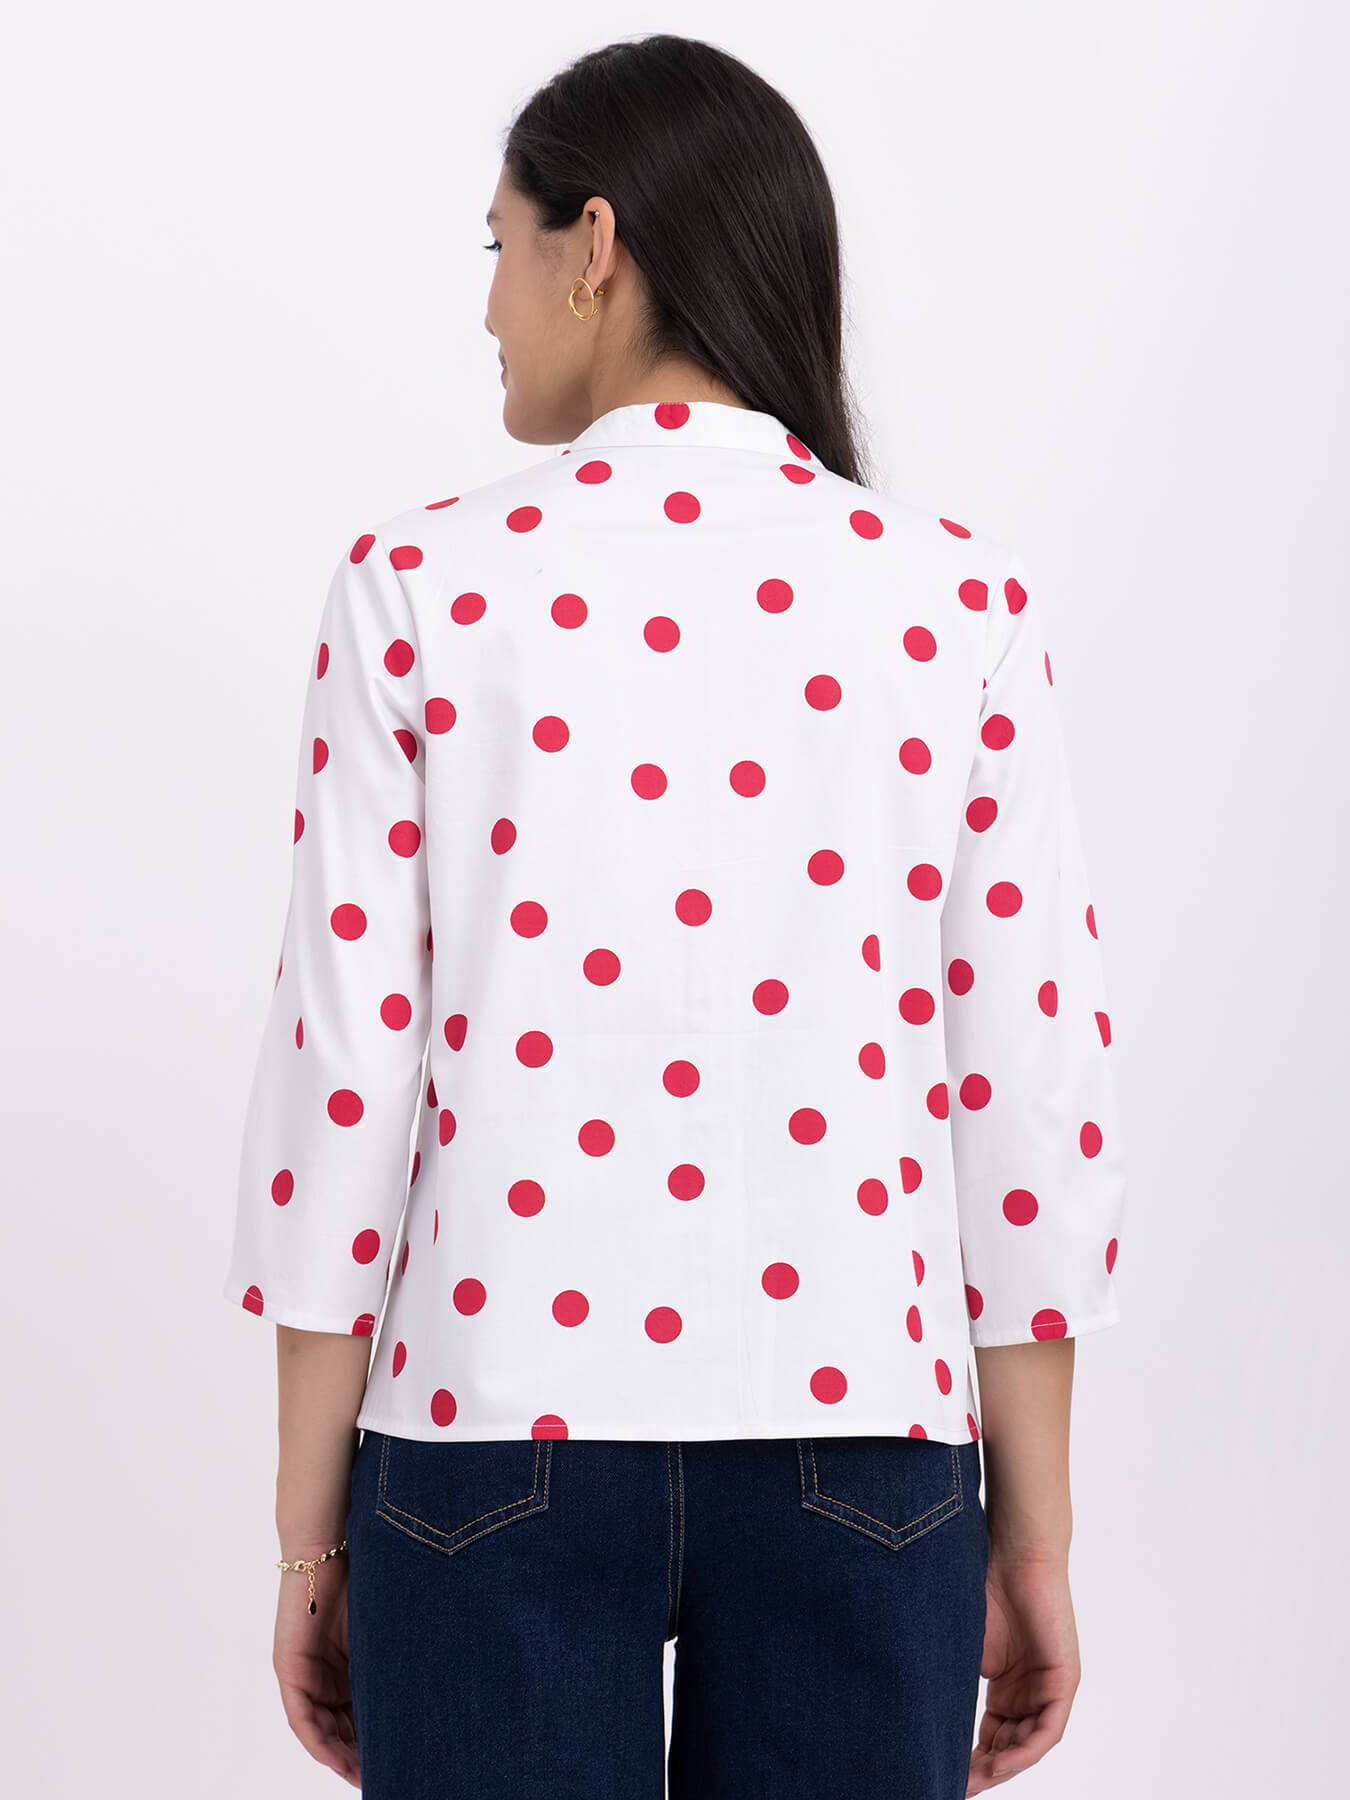 Cotton Polka Dot Top - White And Red